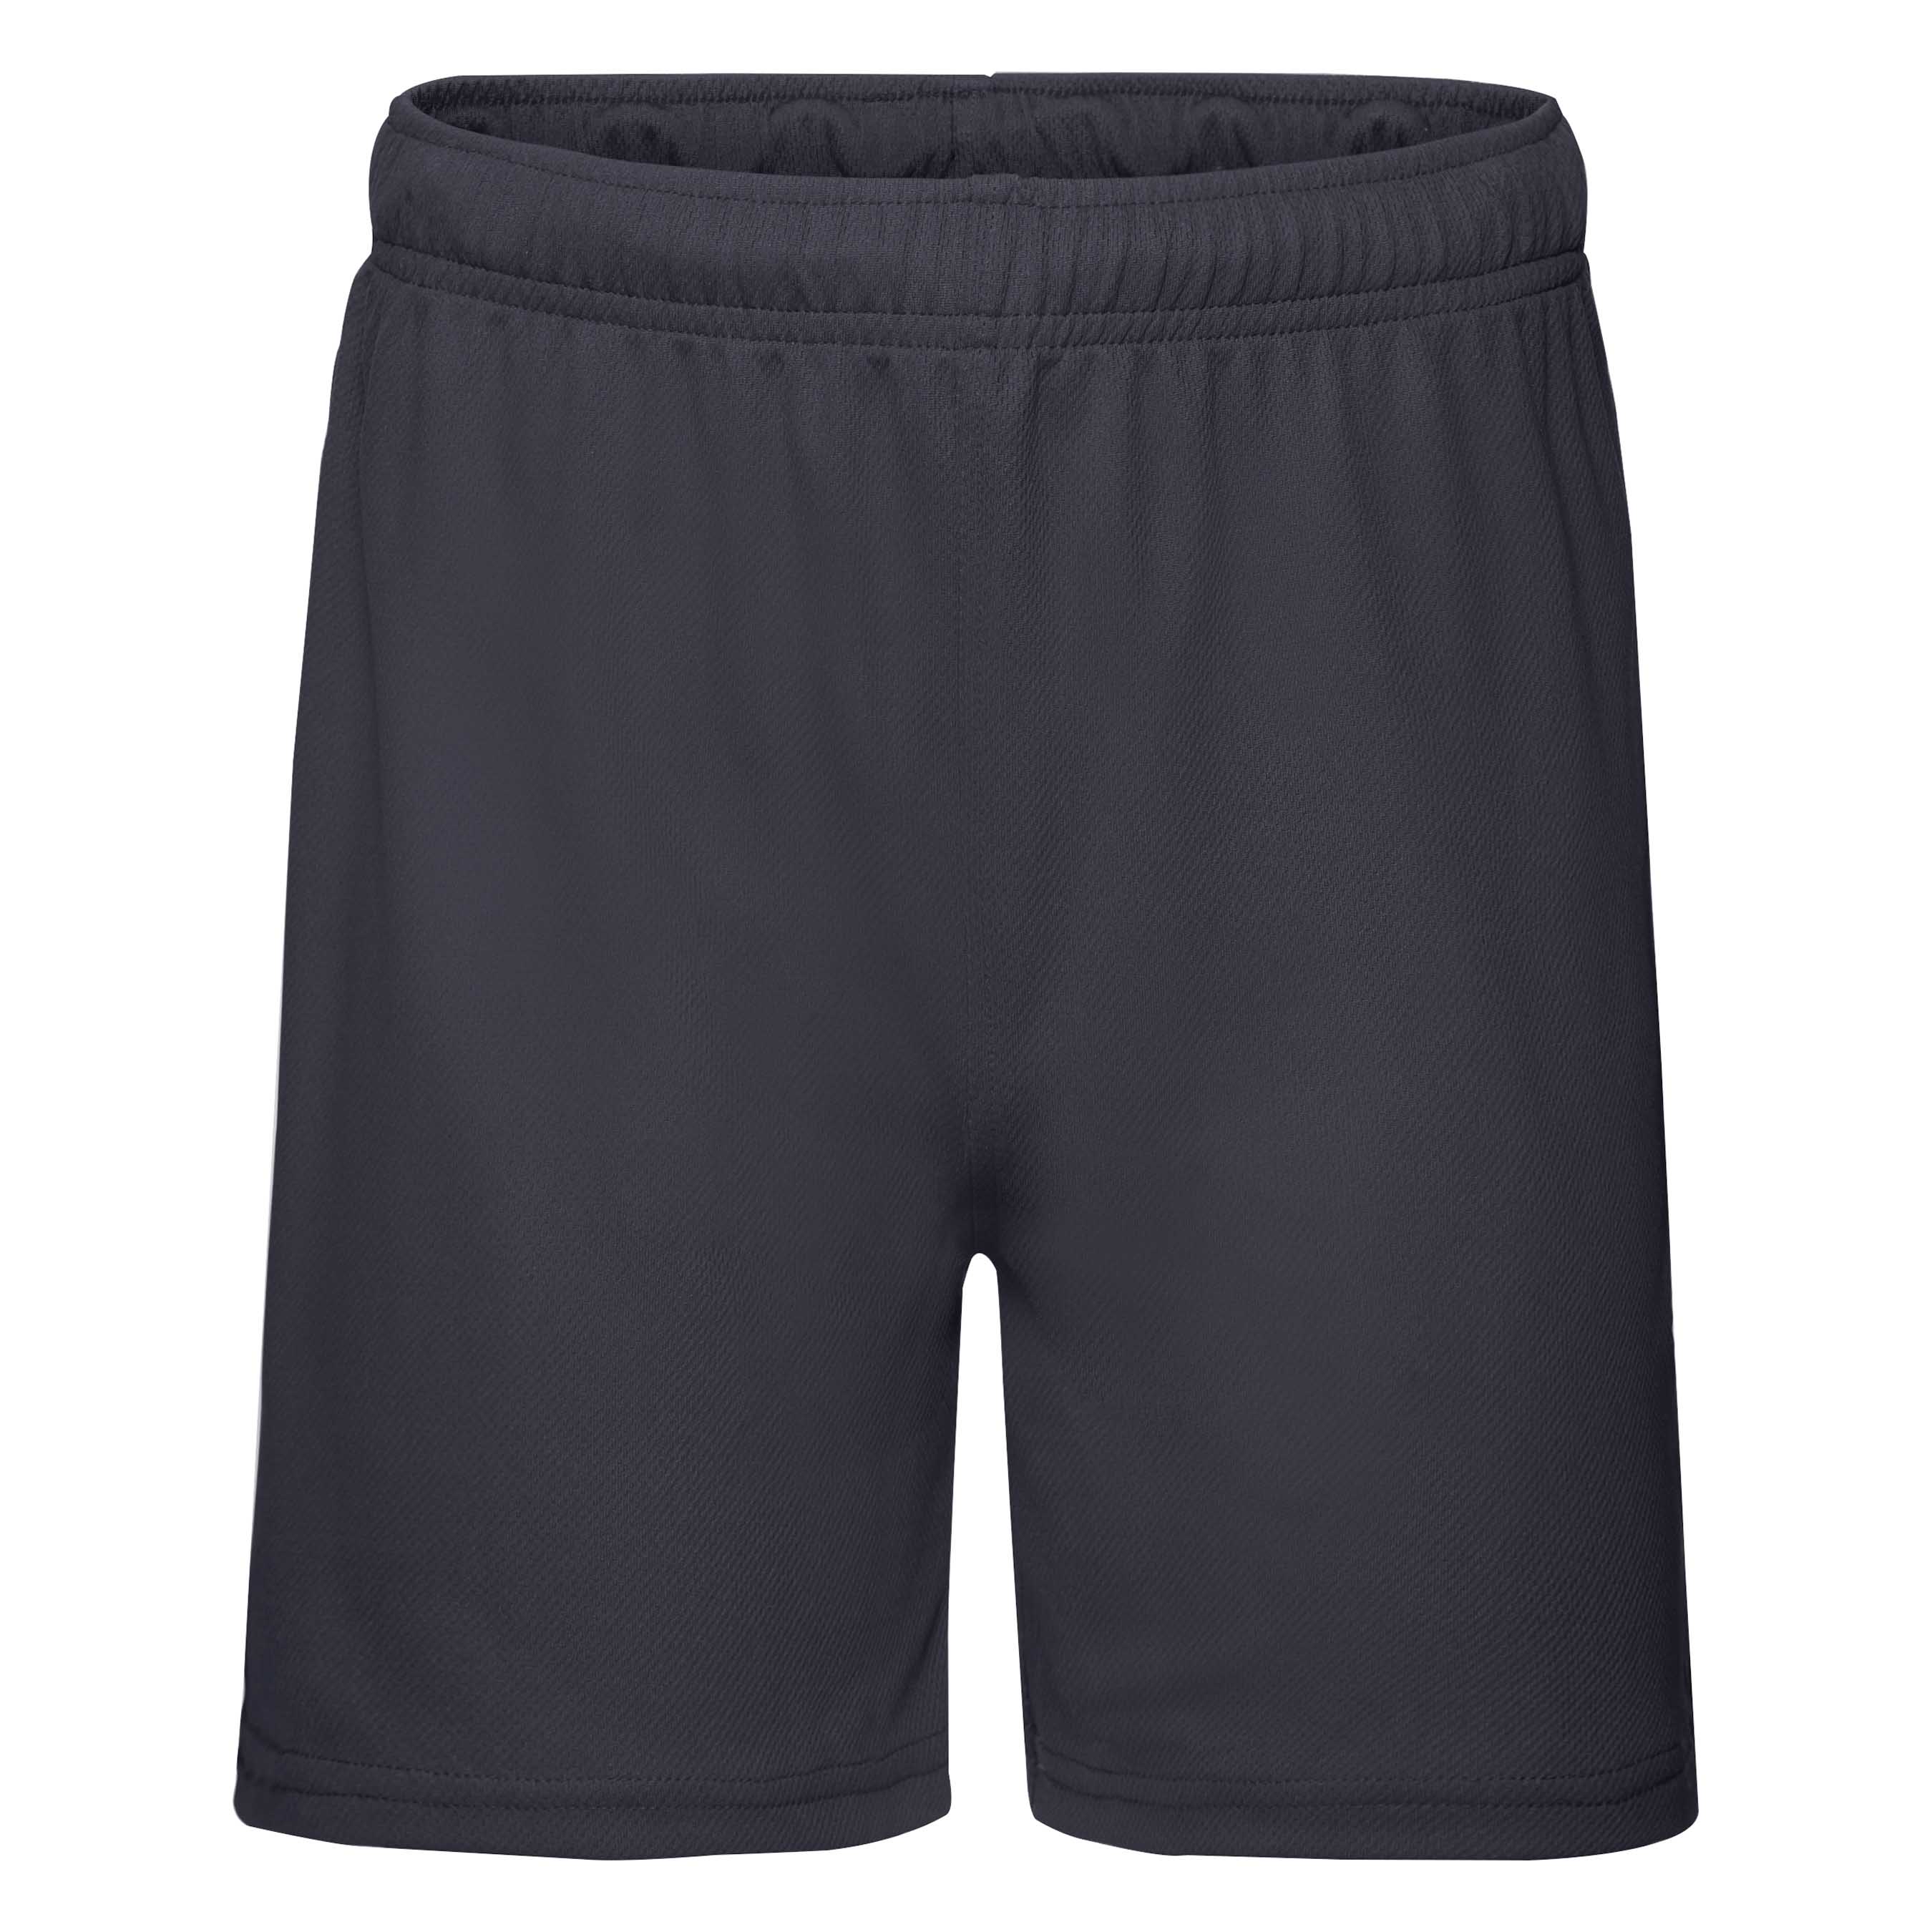 PERFORMANCE SHORTS KIDS | Fruit of the Loom